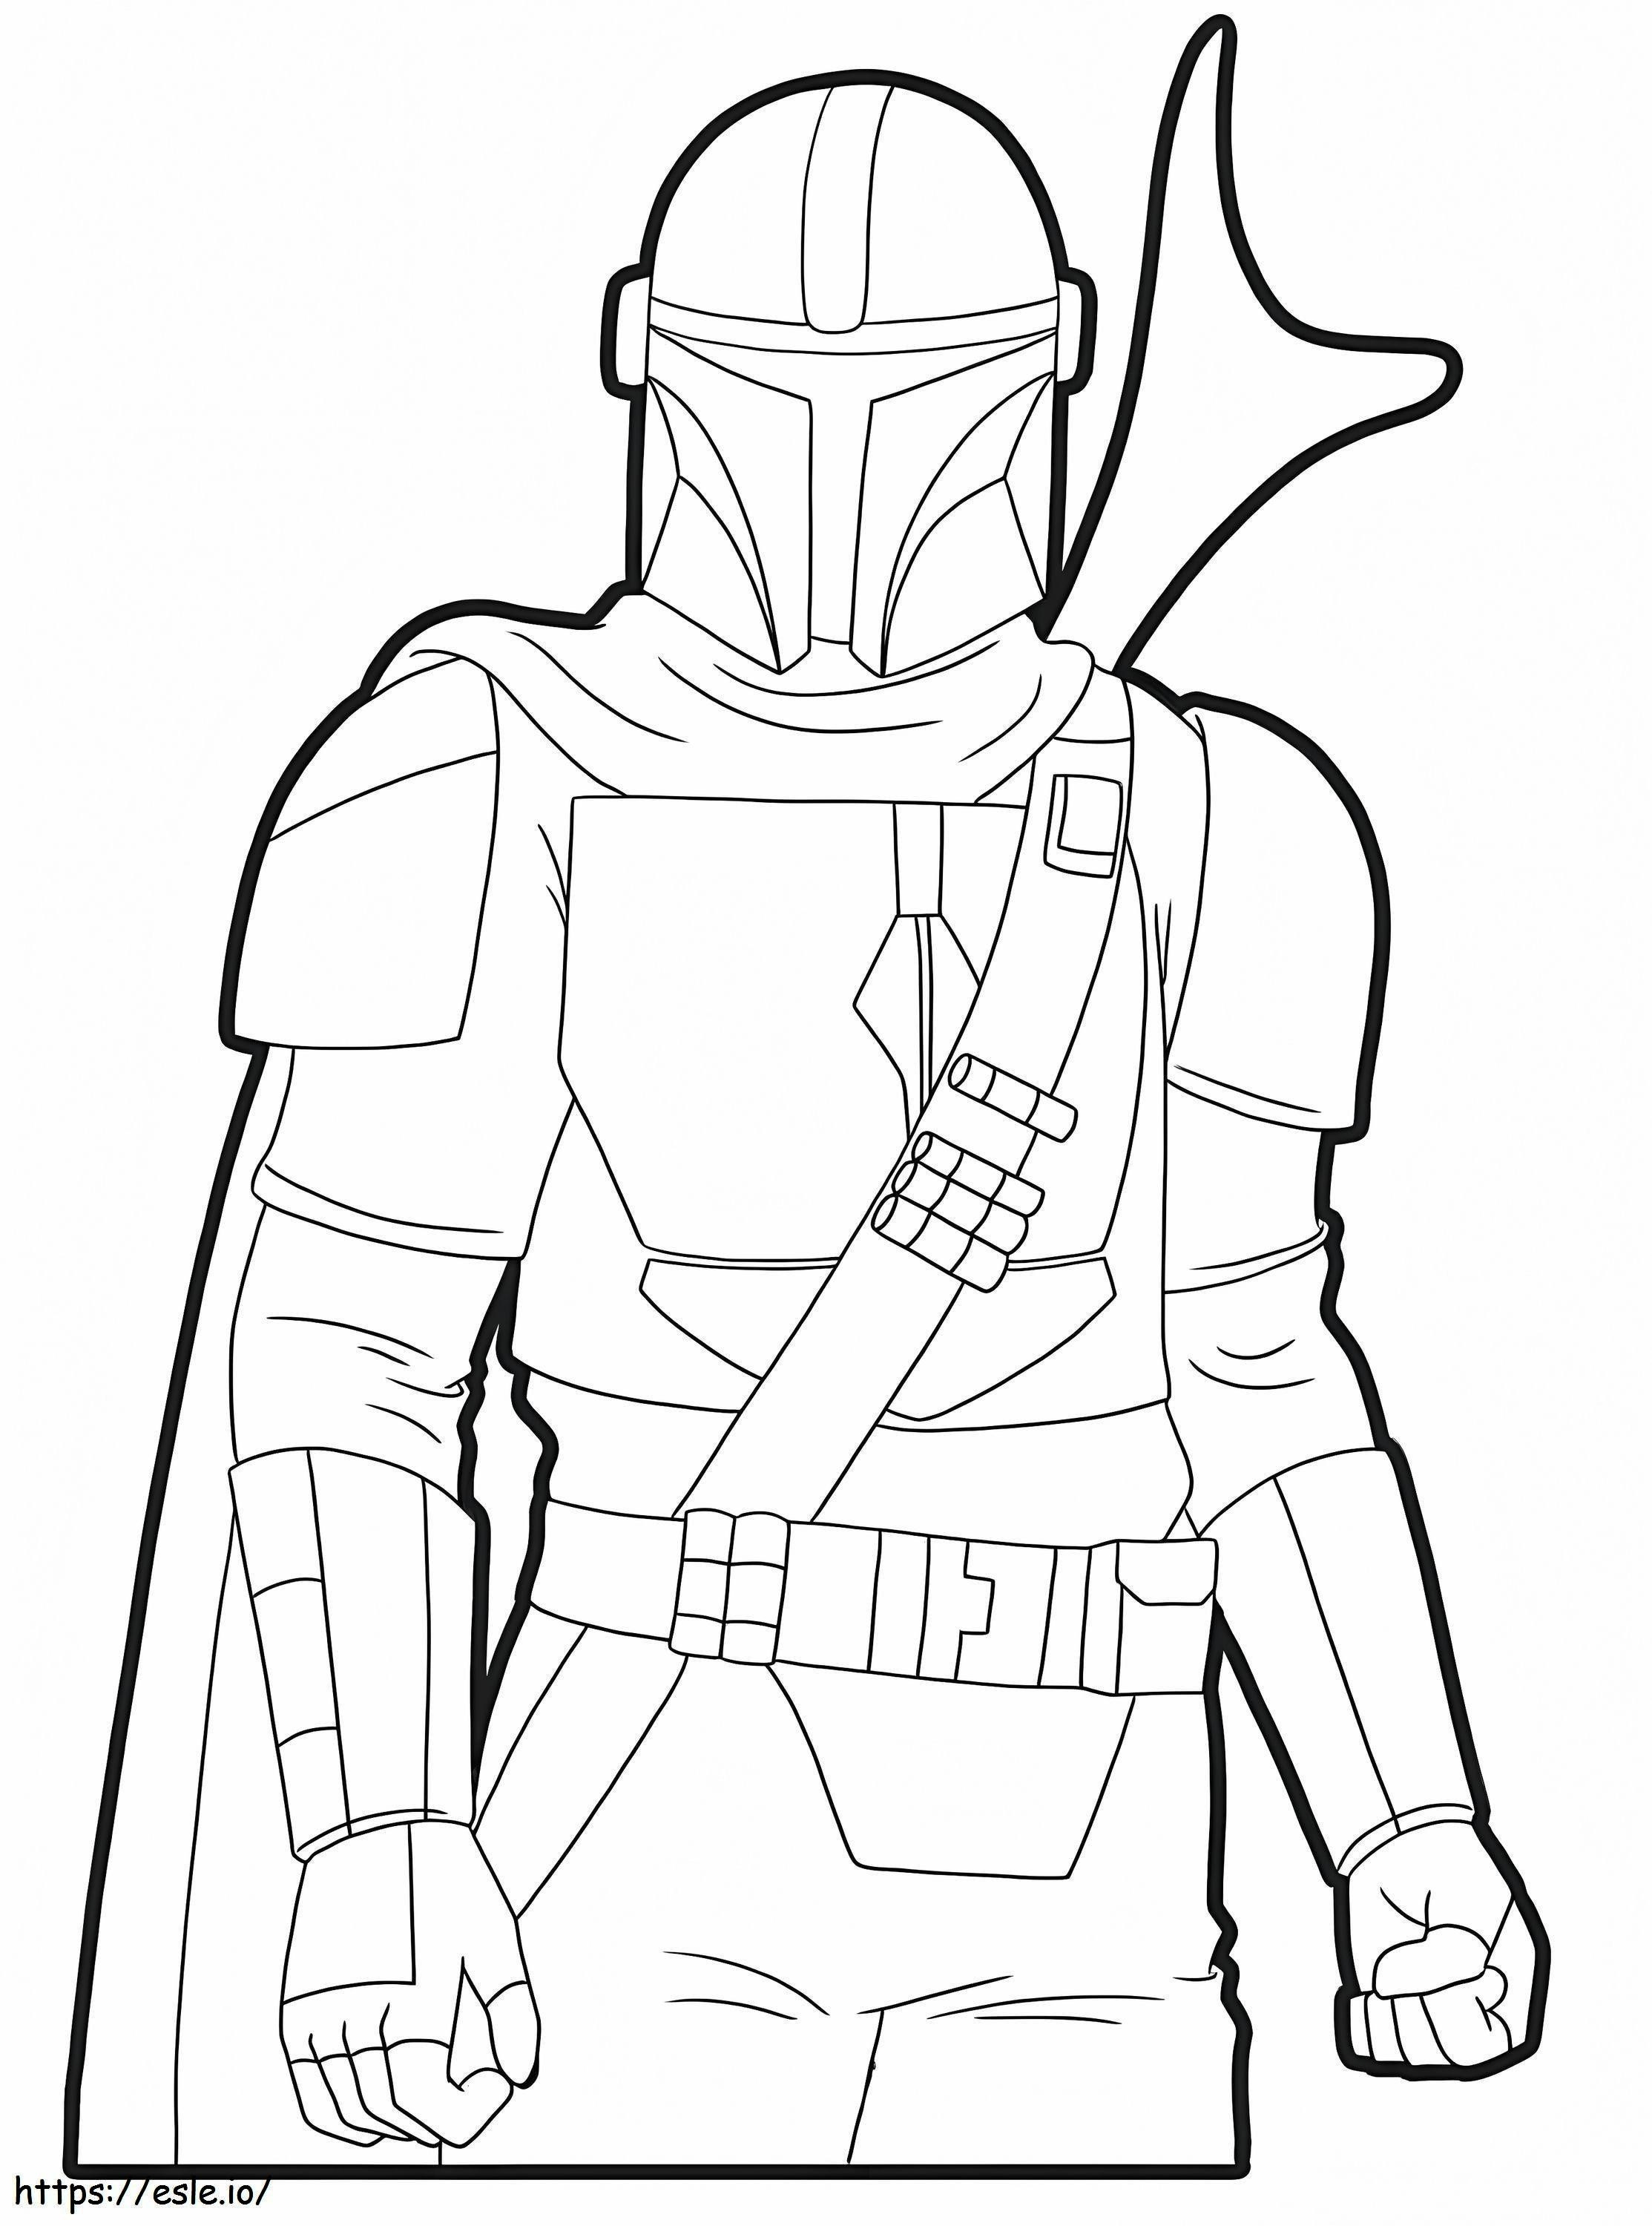 The Mandalorian coloring page